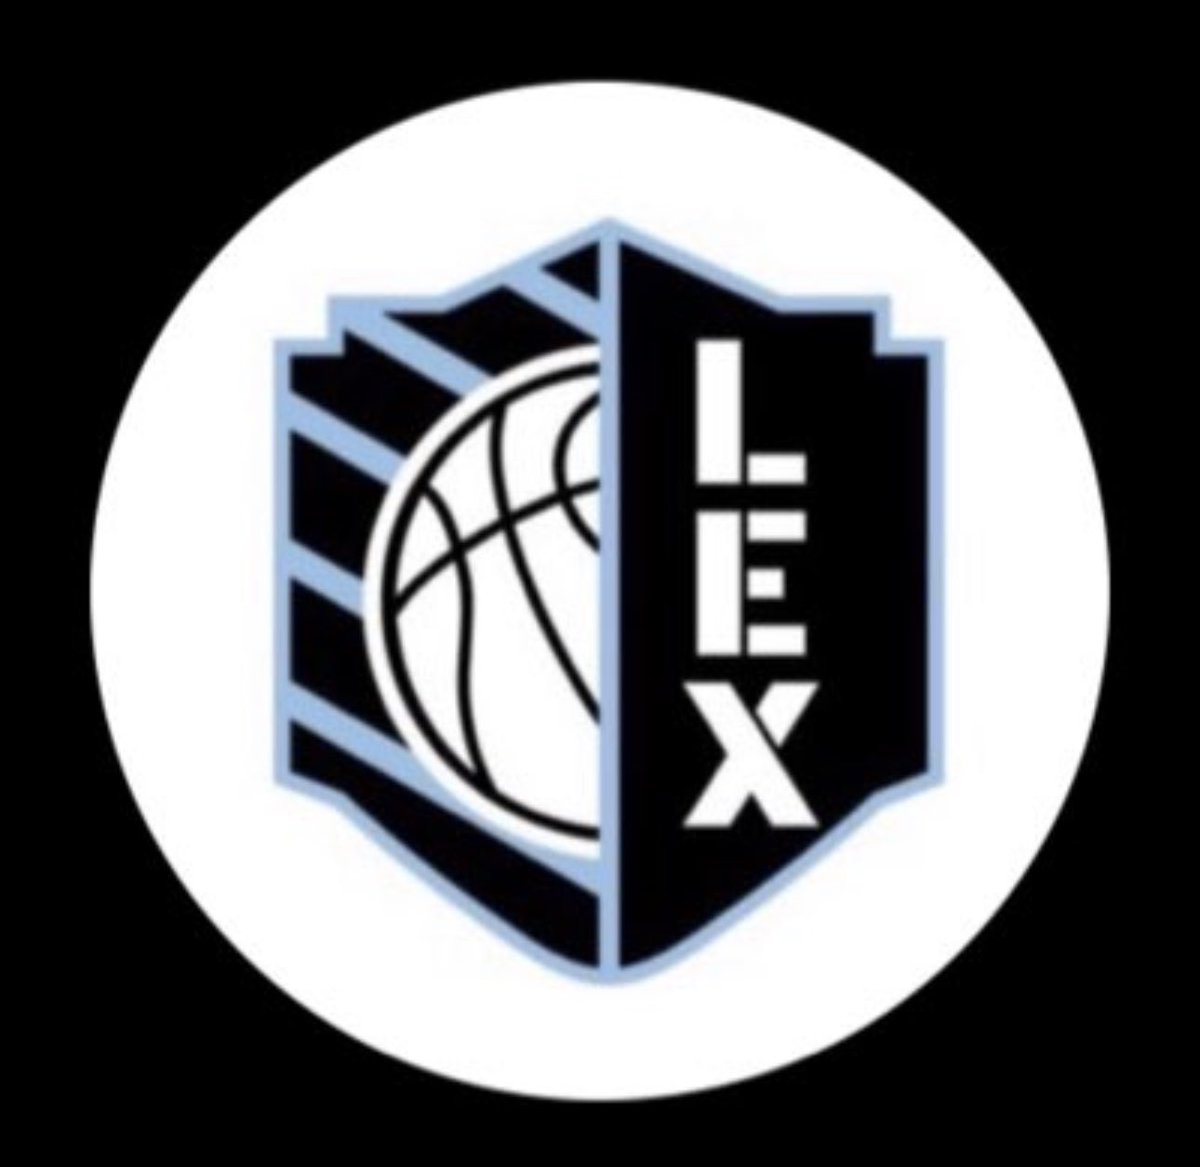 Team Lex has 7️⃣ players in San Antonio playing for a Texas UIL state championship 🏆 and 1️⃣ who has already won in TAPPS.